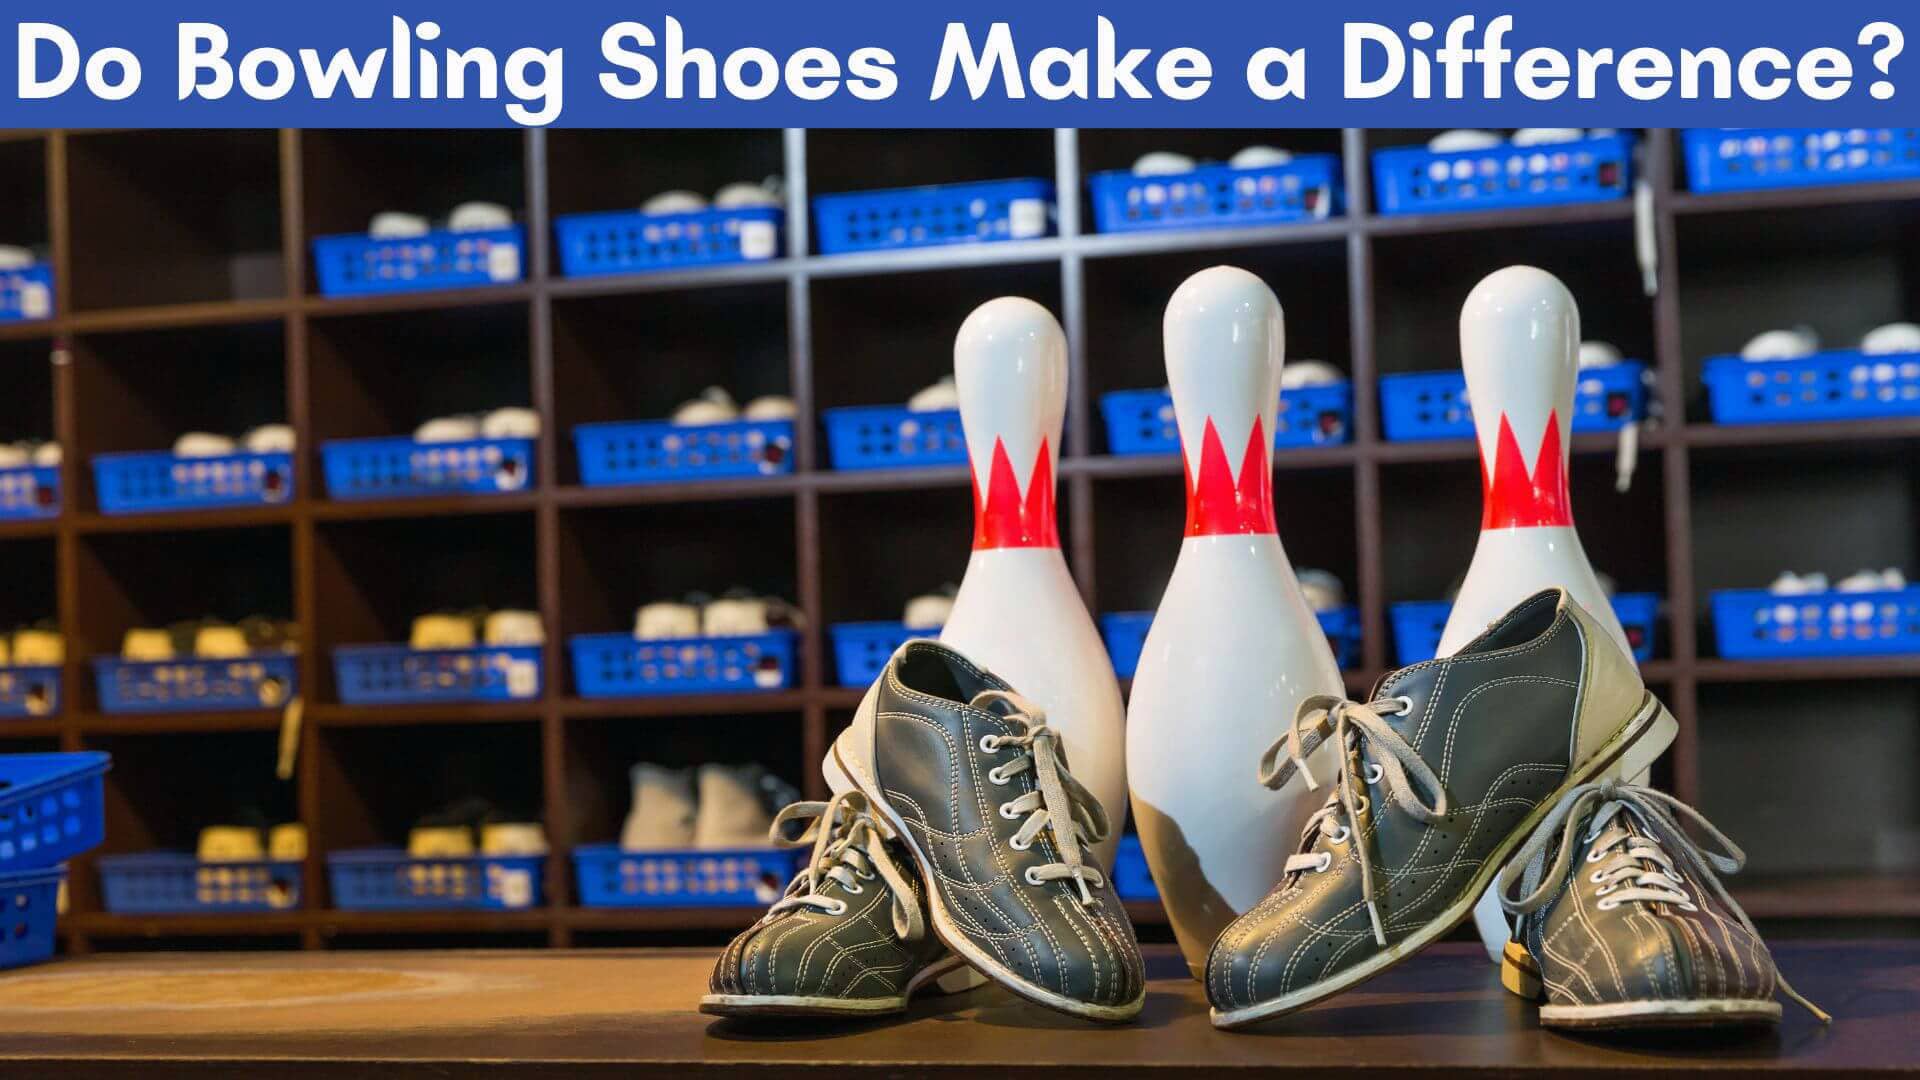 Do Bowling Shoes Make a Difference?